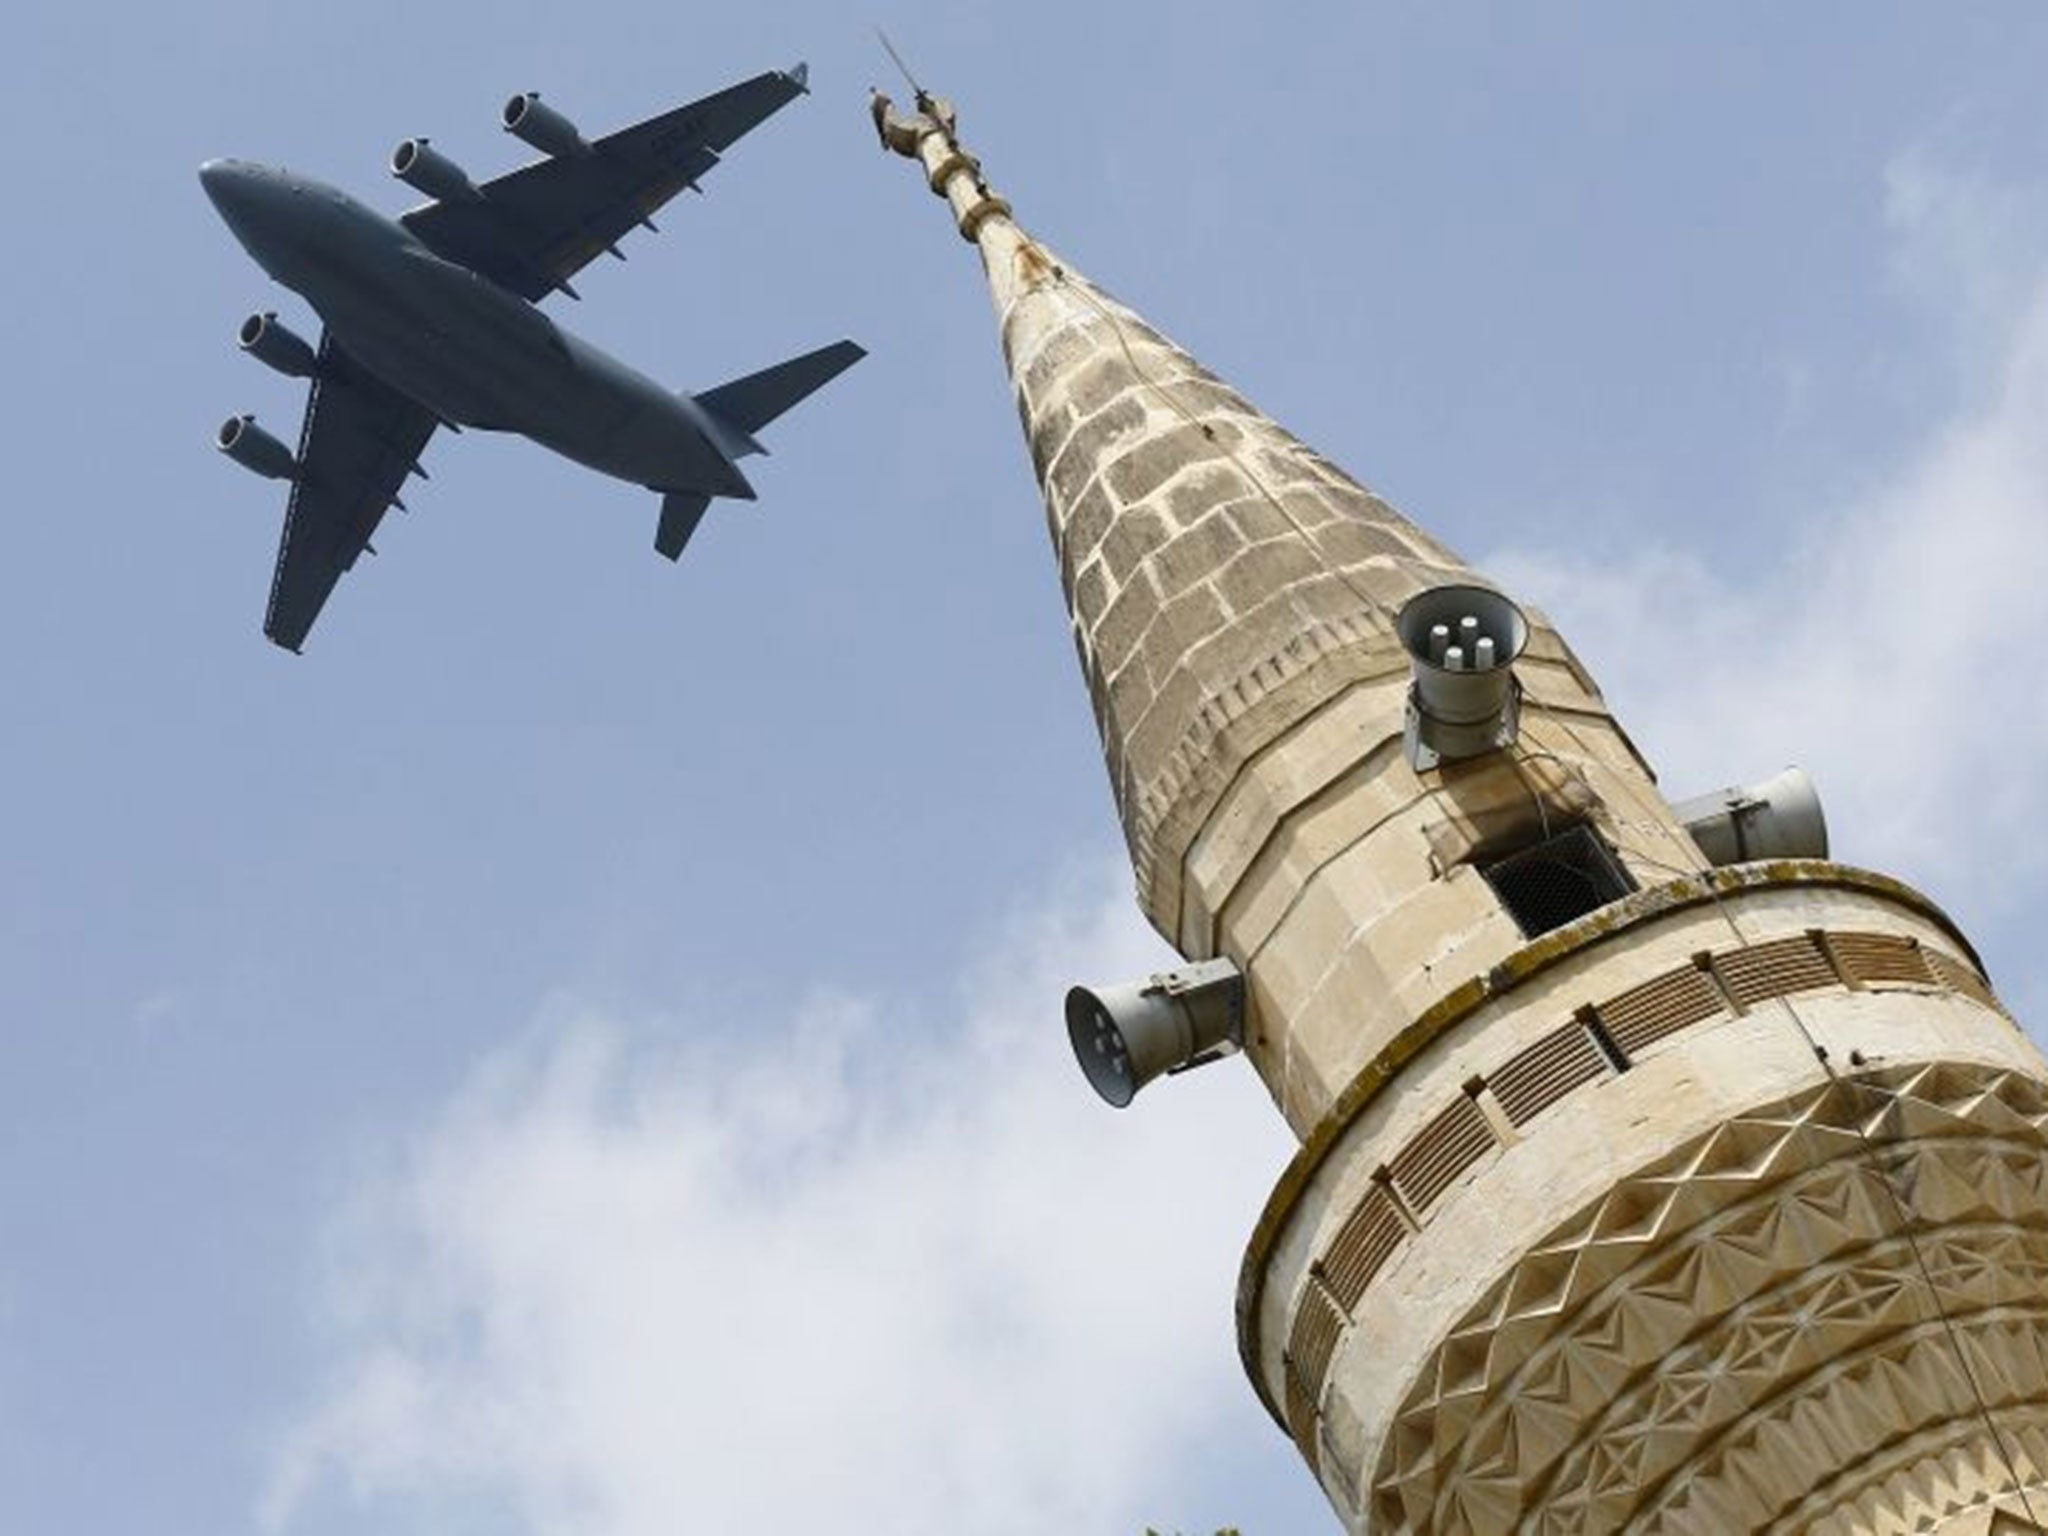 A US Air Force Boeing C-17A Globemaster III large transport aircraft flies over a minaret after taking off from Incirlik air base in Adana, Turkey, on 12 August 2015